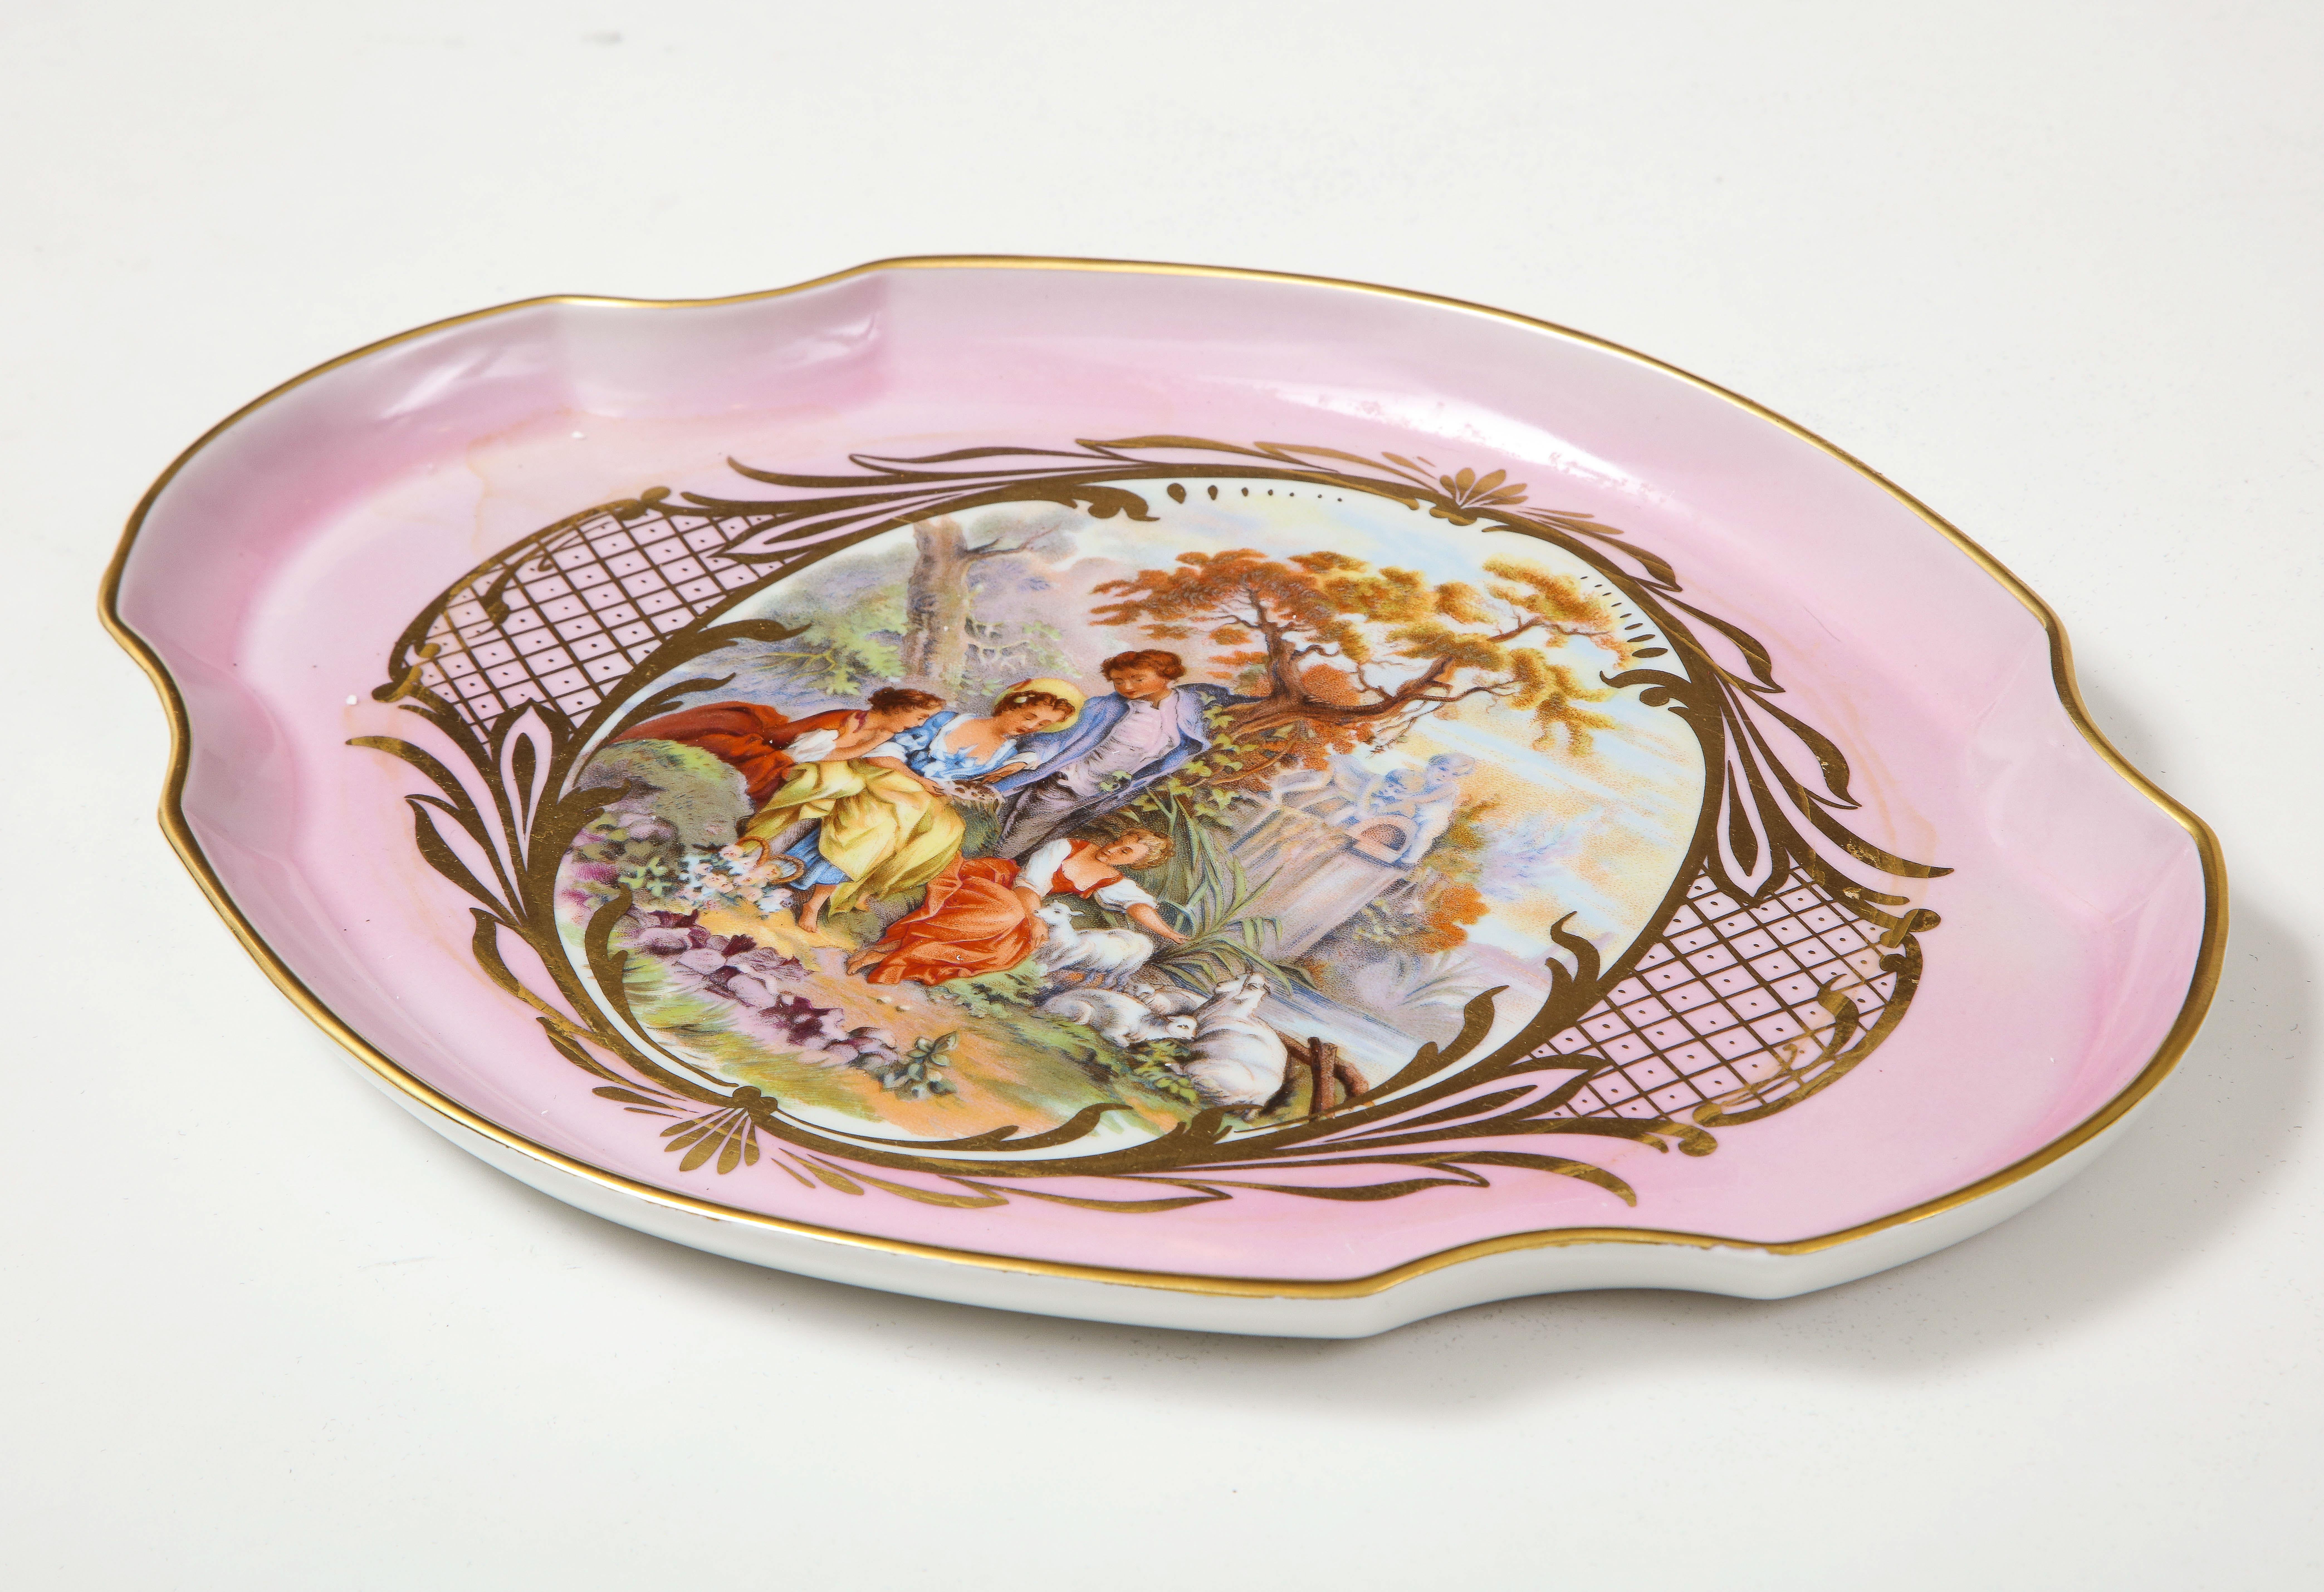 Turn of the century Paris Pink banded porcelain tray featuring lakeside leisure picnic with gold accents. Great as a serving or vanity tray.